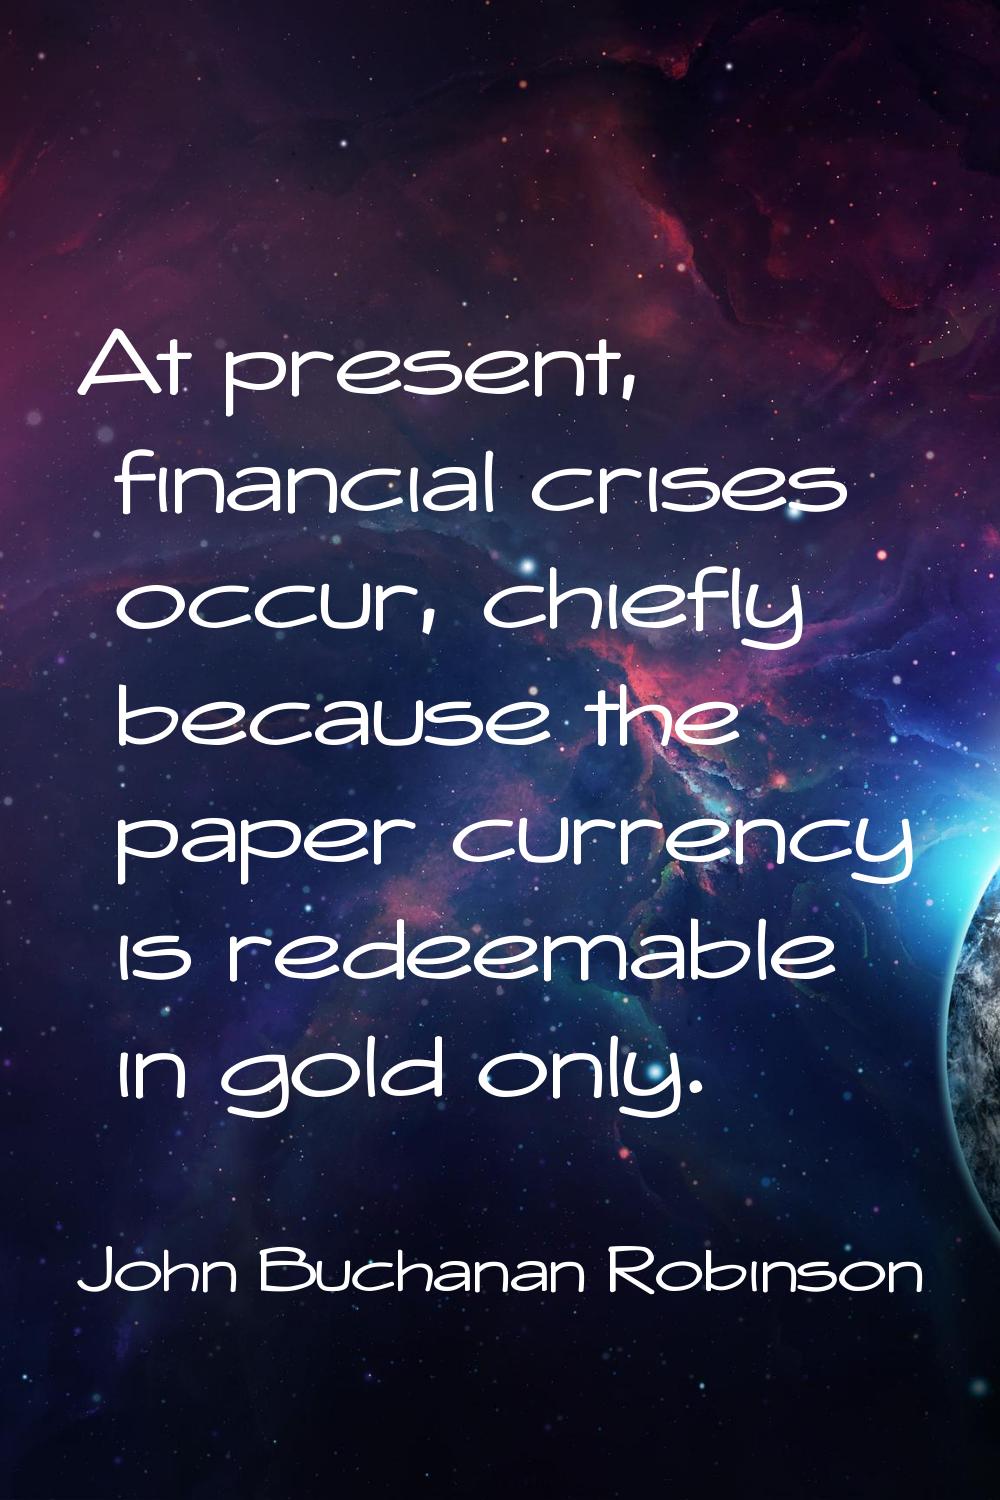 At present, financial crises occur, chiefly because the paper currency is redeemable in gold only.